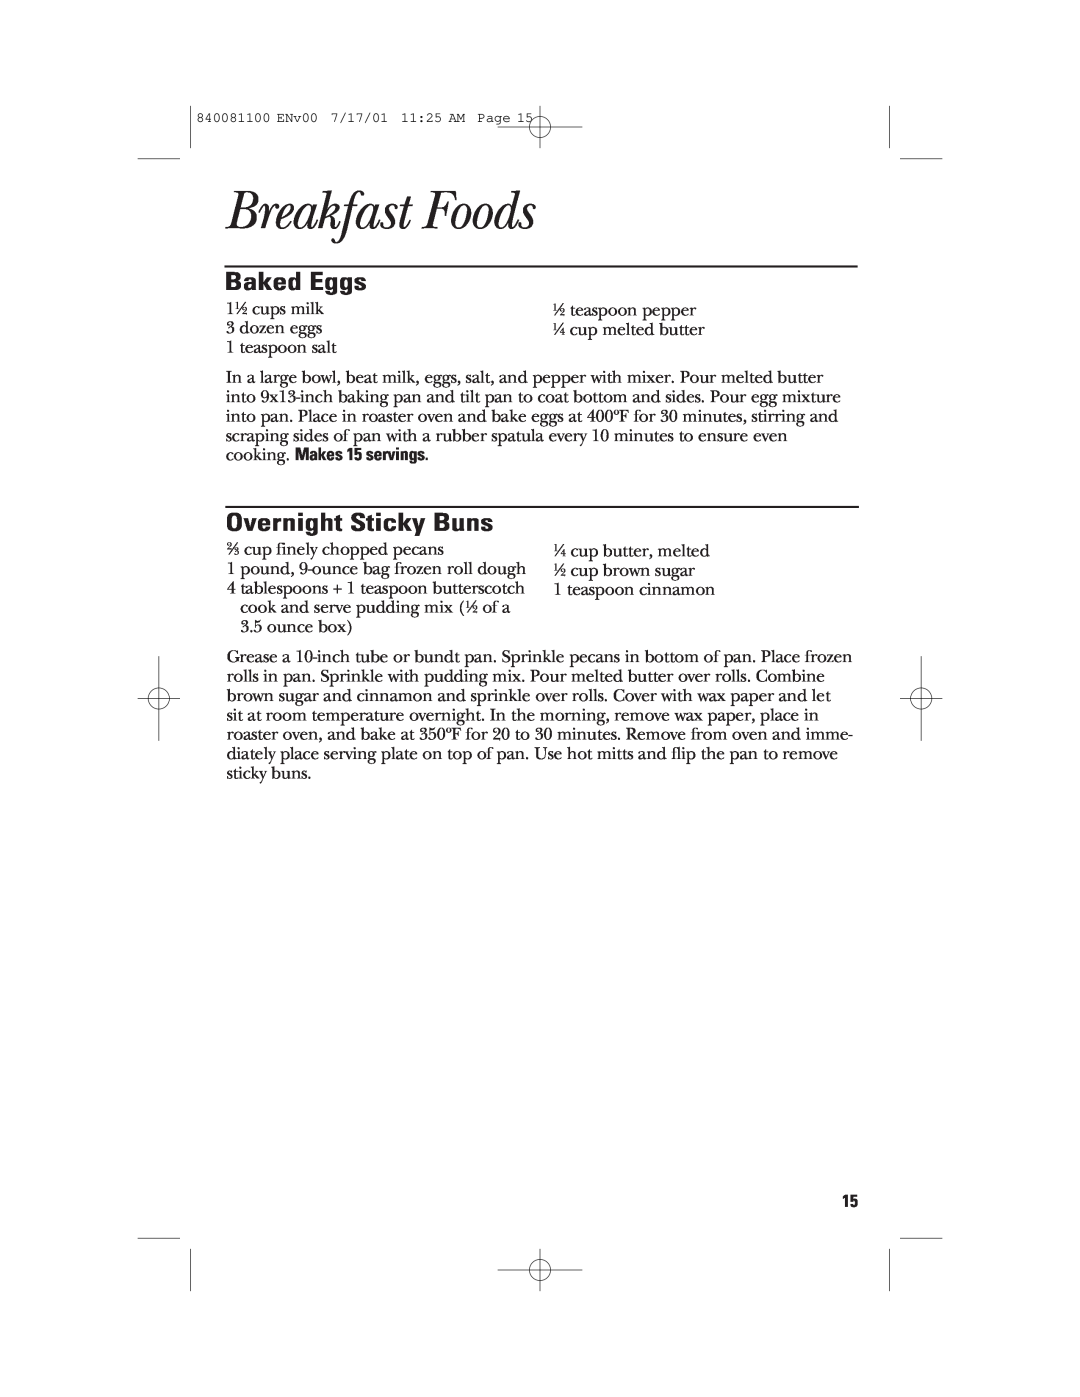 GE 840081100 manual Breakfast Foods, Baked Eggs, Overnight Sticky Buns 